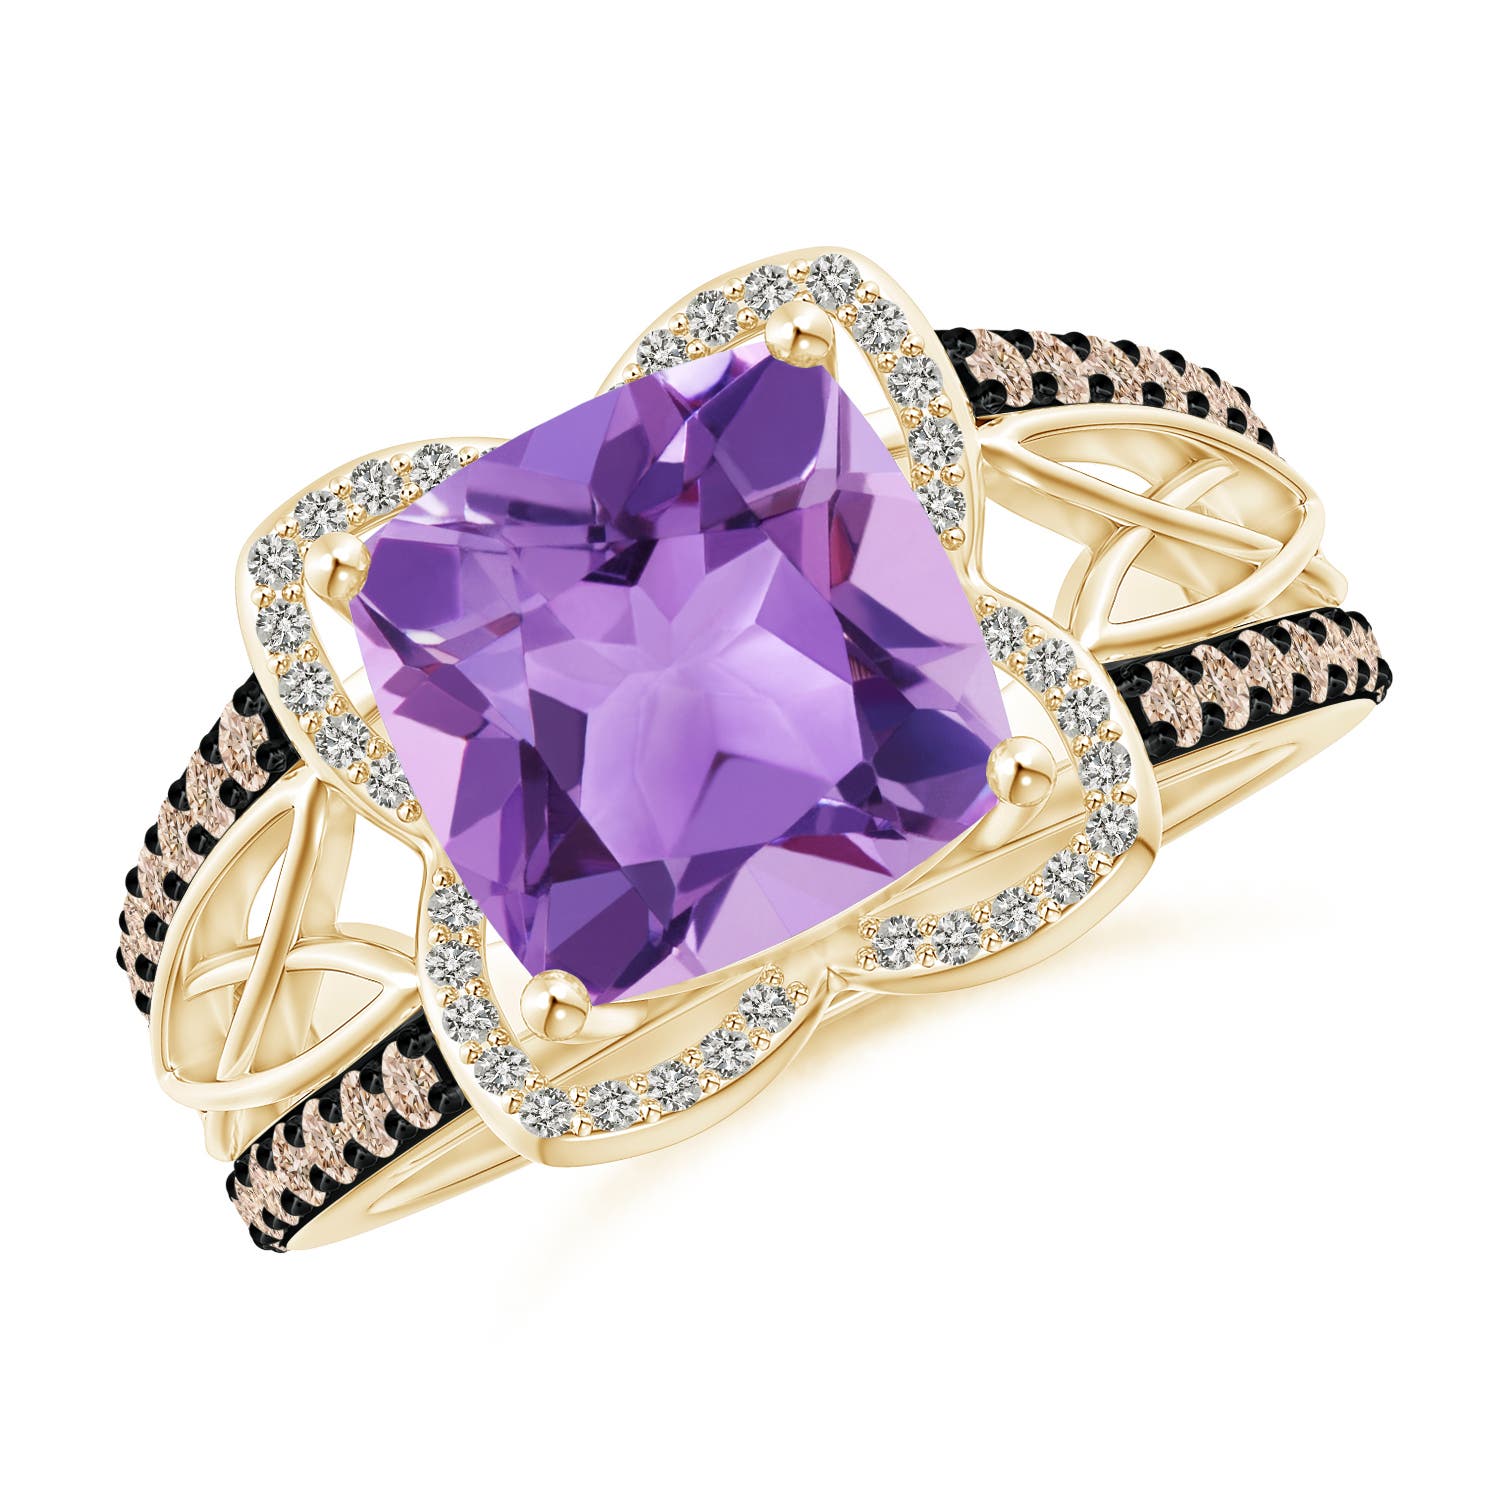 A - Amethyst / 3.61 CT / 14 KT Yellow Gold